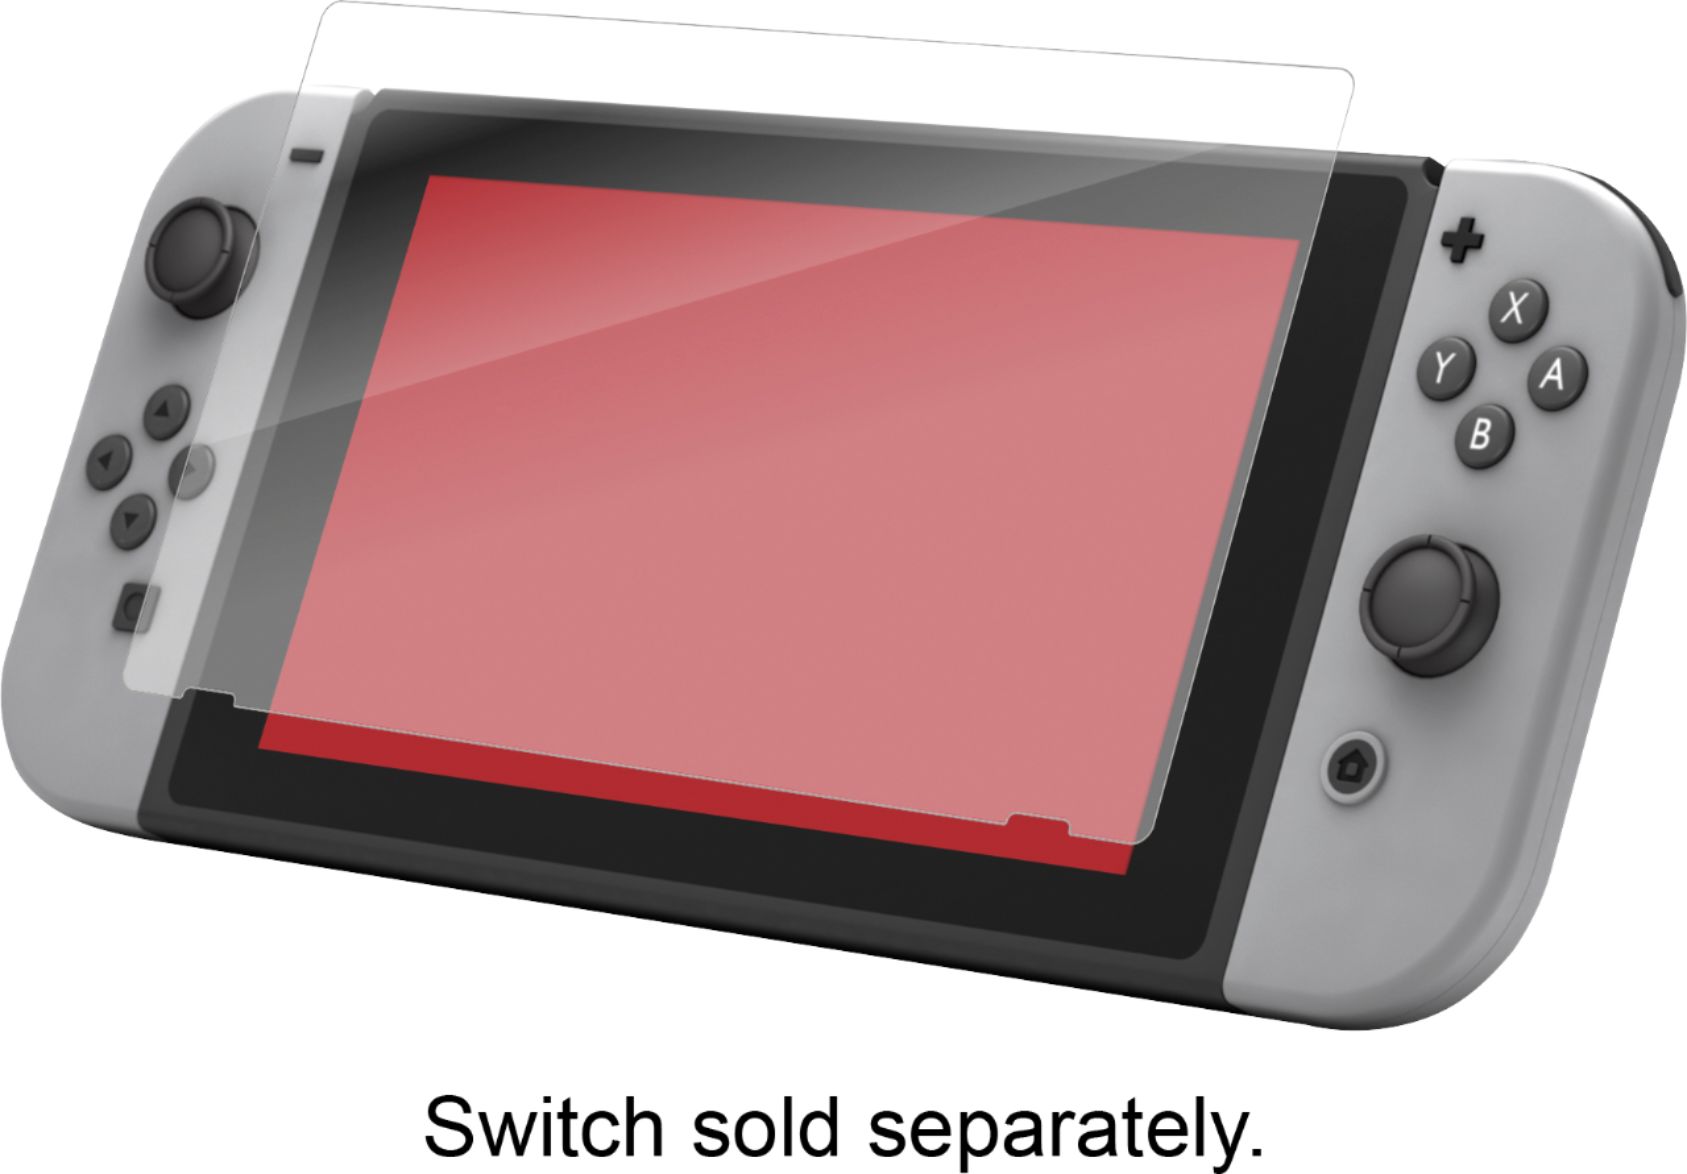 nintendo switch with screen protector